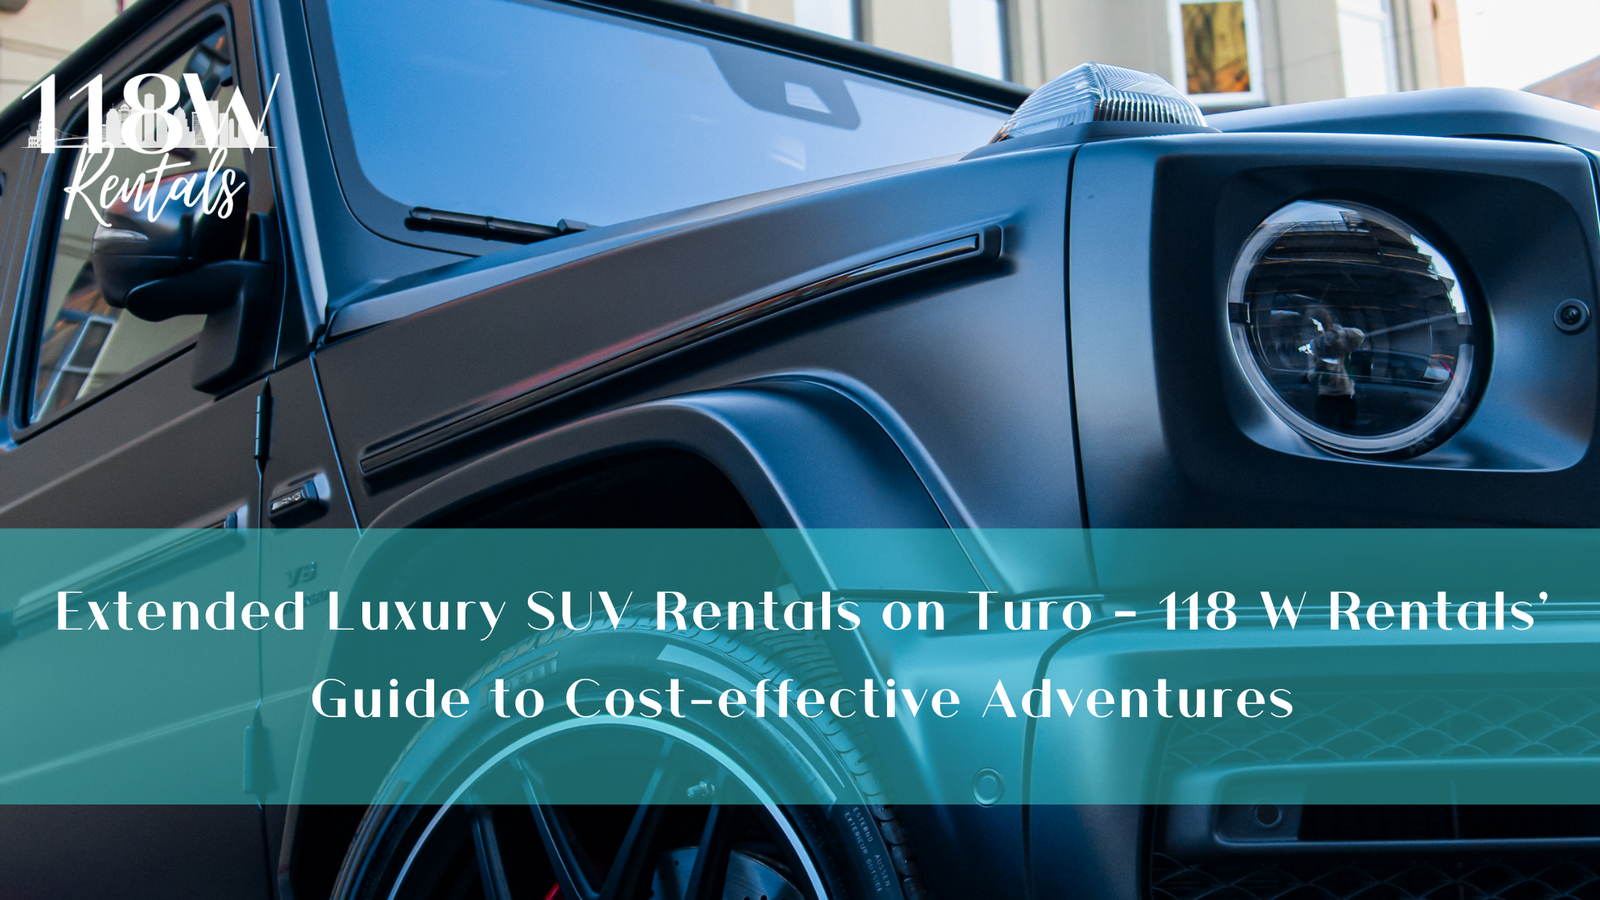 Extended Luxury SUV Rentals on Turo – 118 W Rentals’ Guide to Cost-effective Adventures